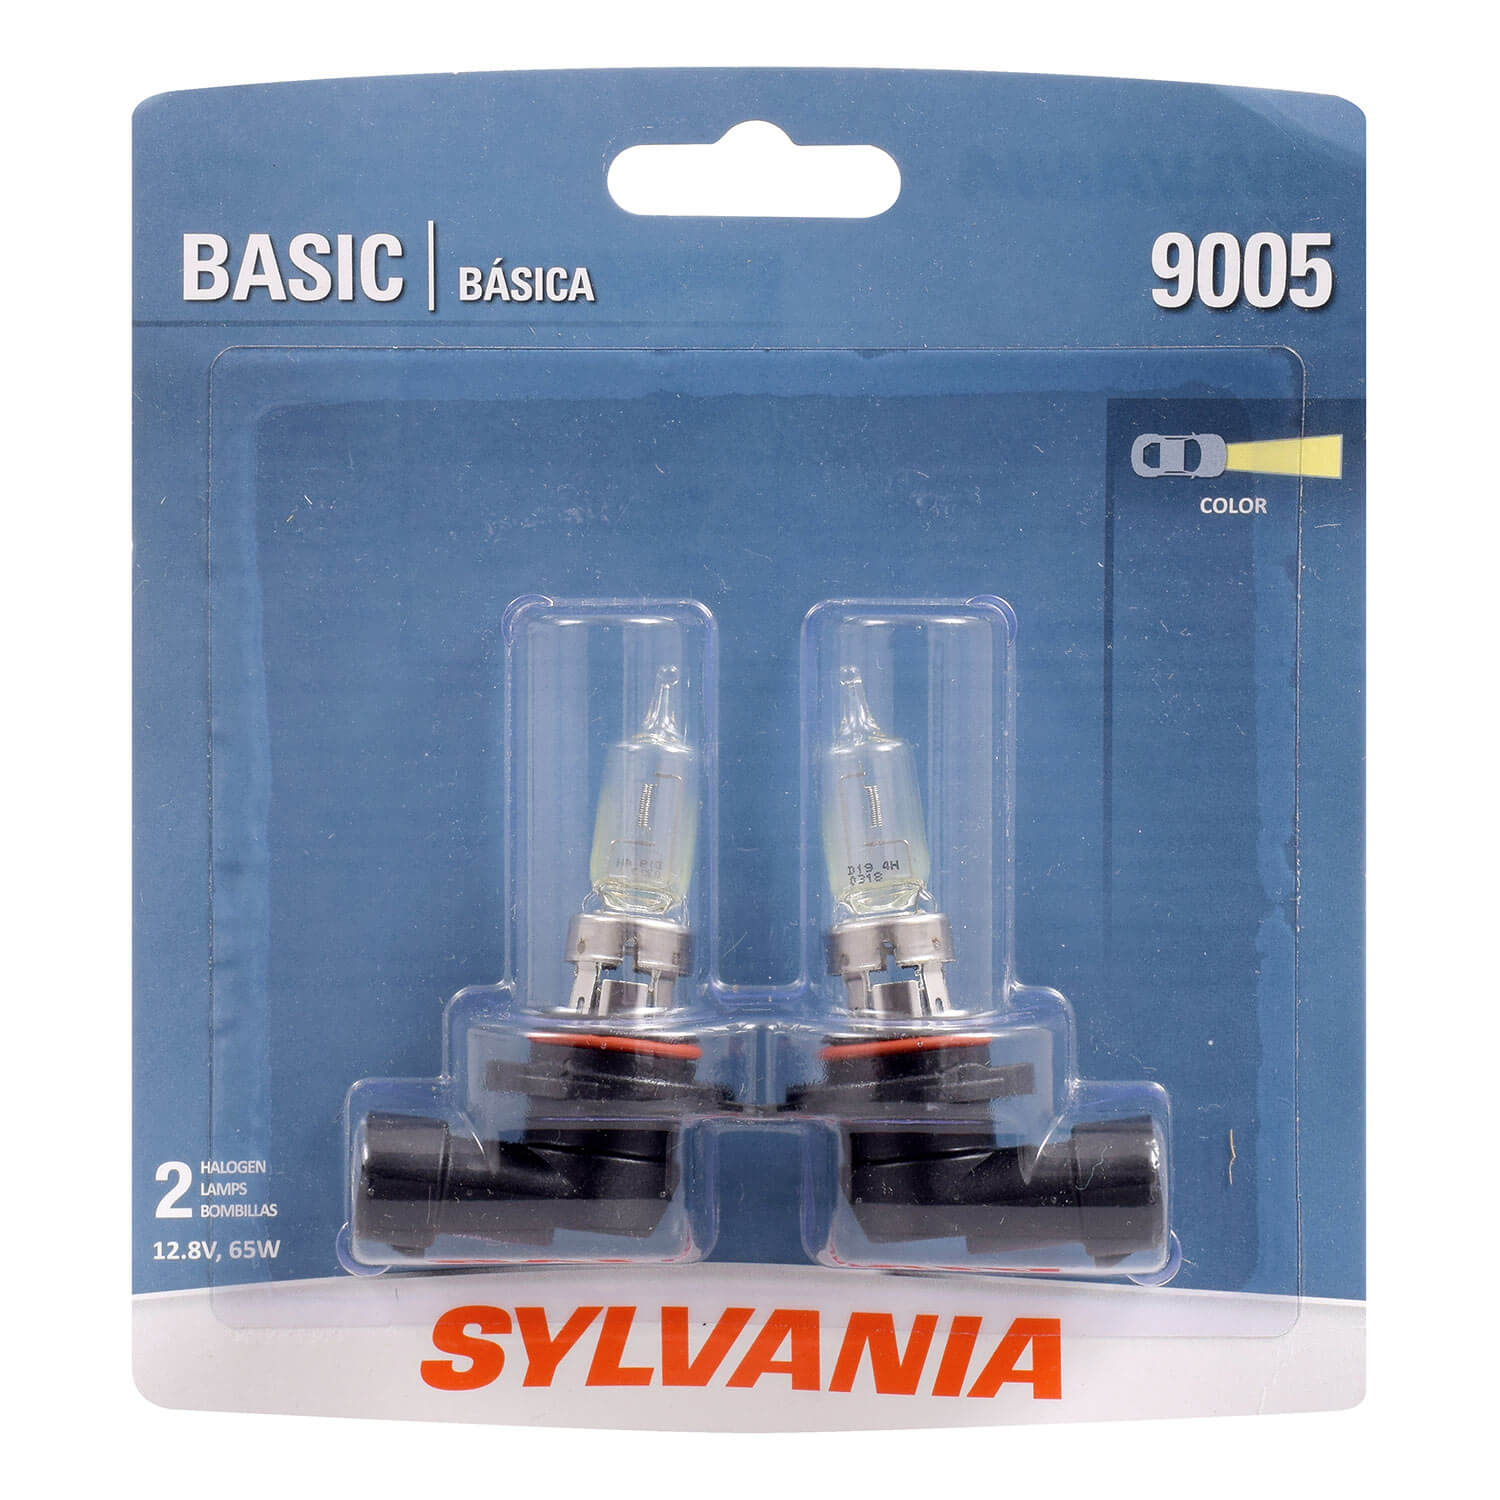  NEWBROWN 9005 HB3 Halogen Headlight Bulb with Super White Light  Long Life Replacement P20D 12V/60W (2 Pack) : Automotive